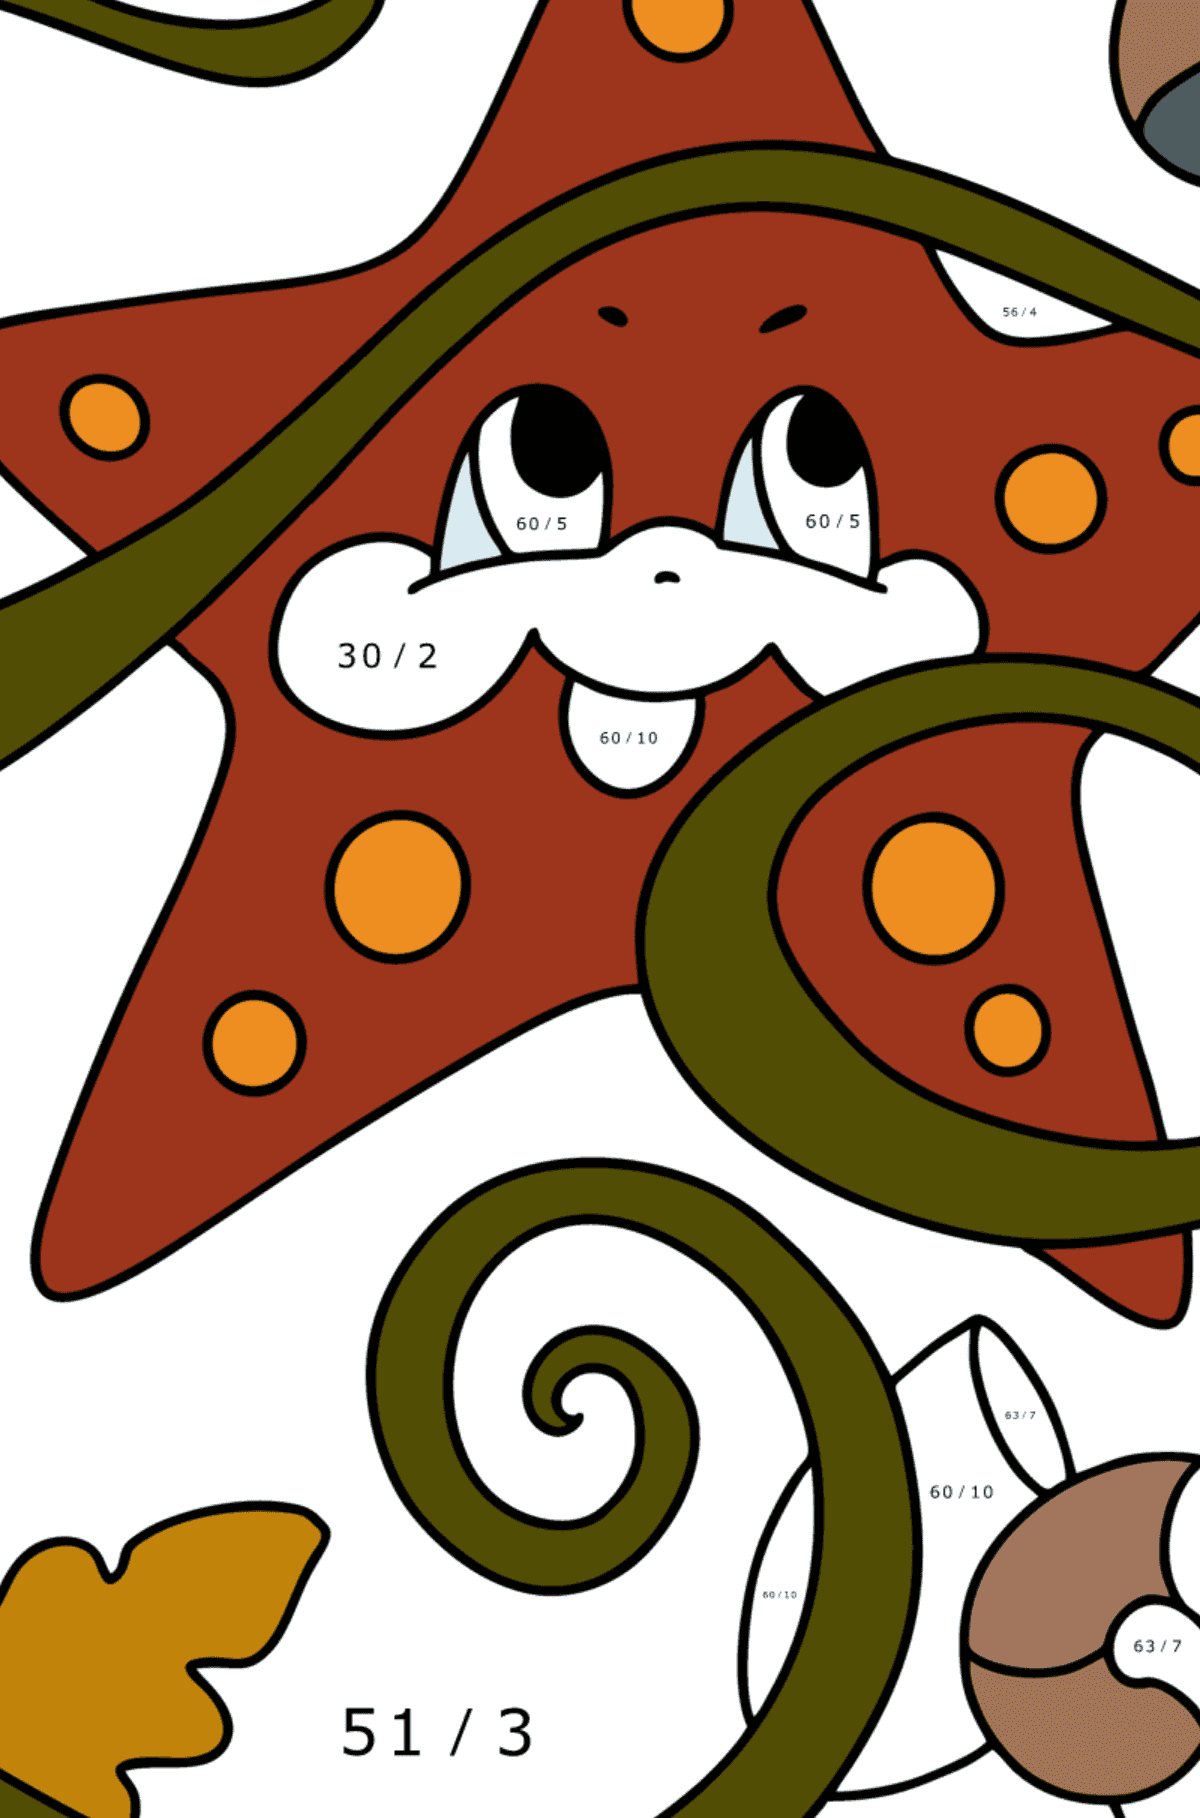 Baby starfish coloring page - Math Coloring - Division for Kids